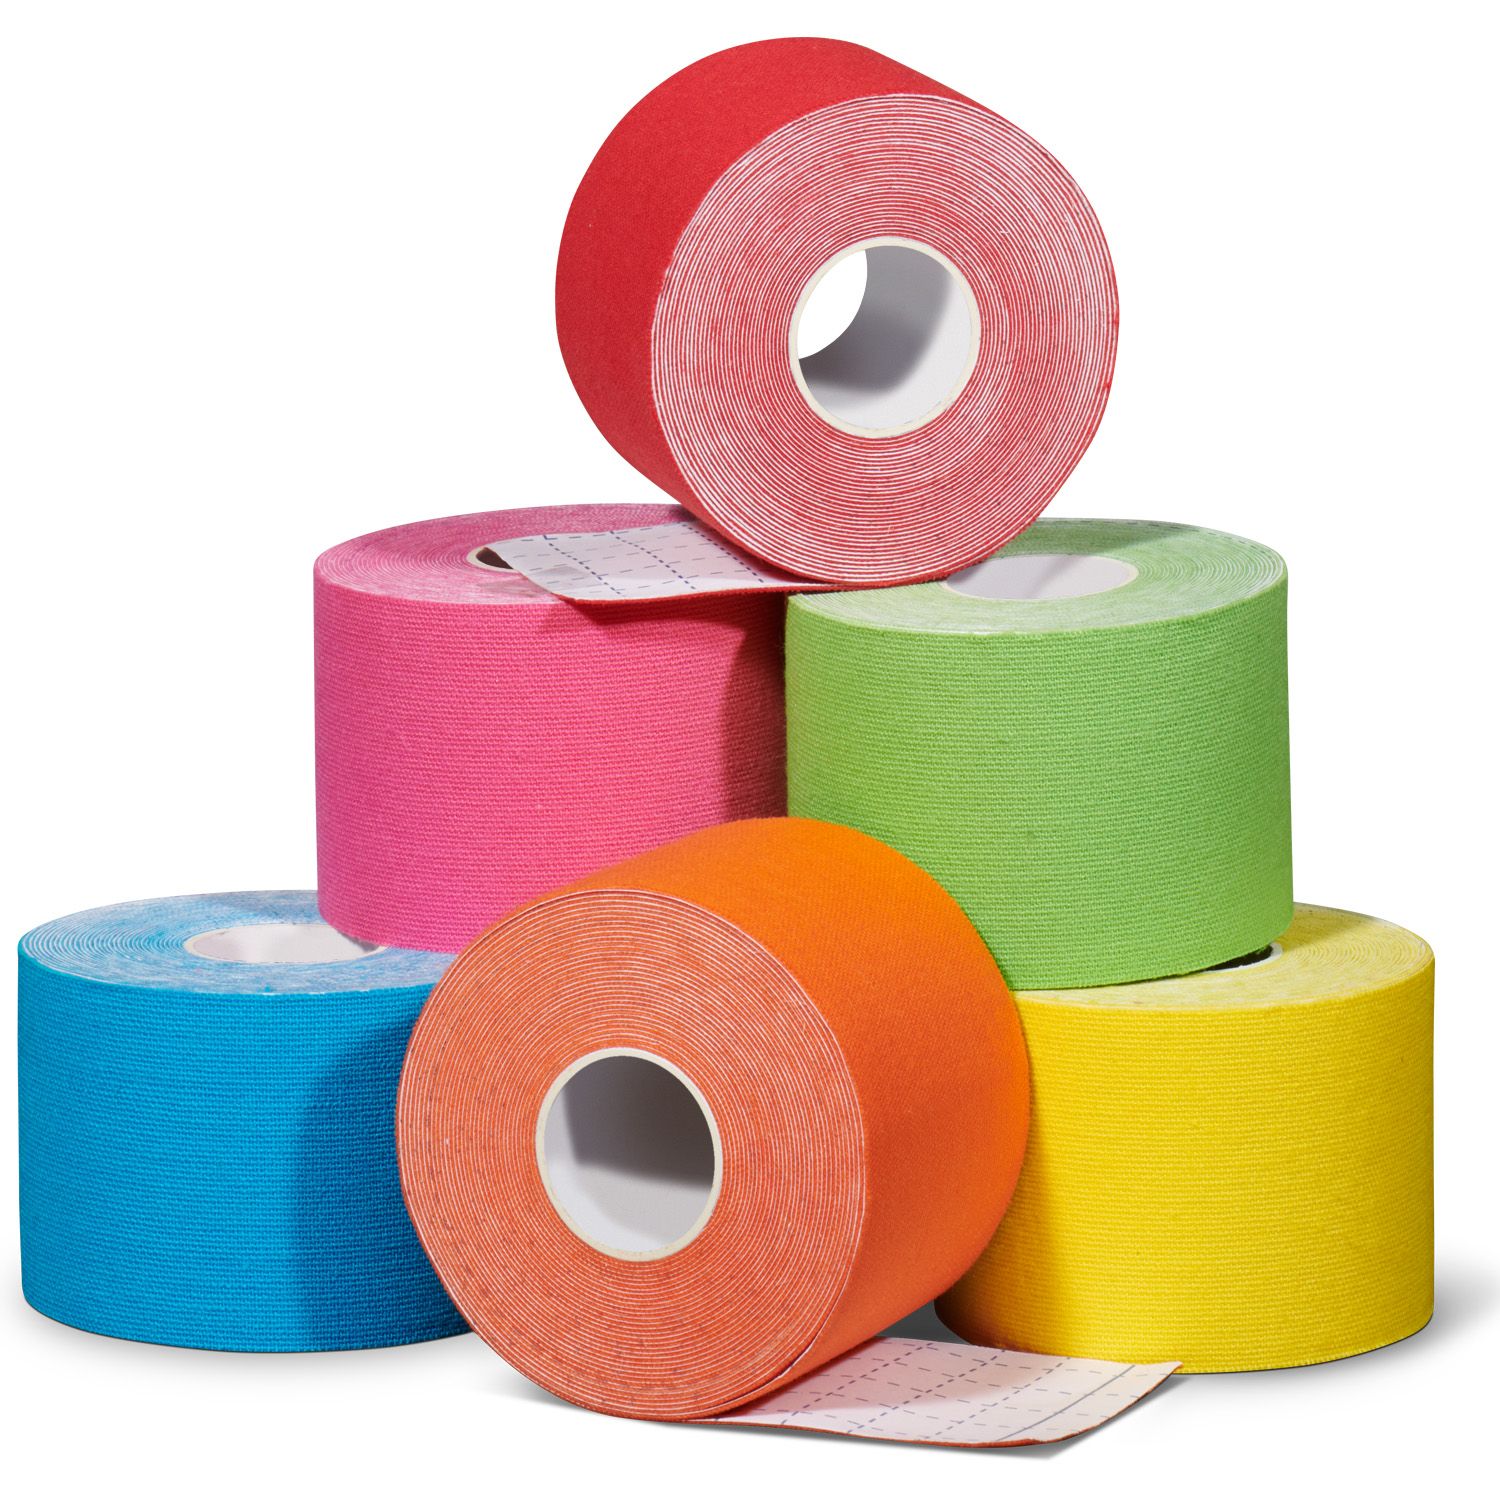 gladiator sports kinesiology tape six rolls together